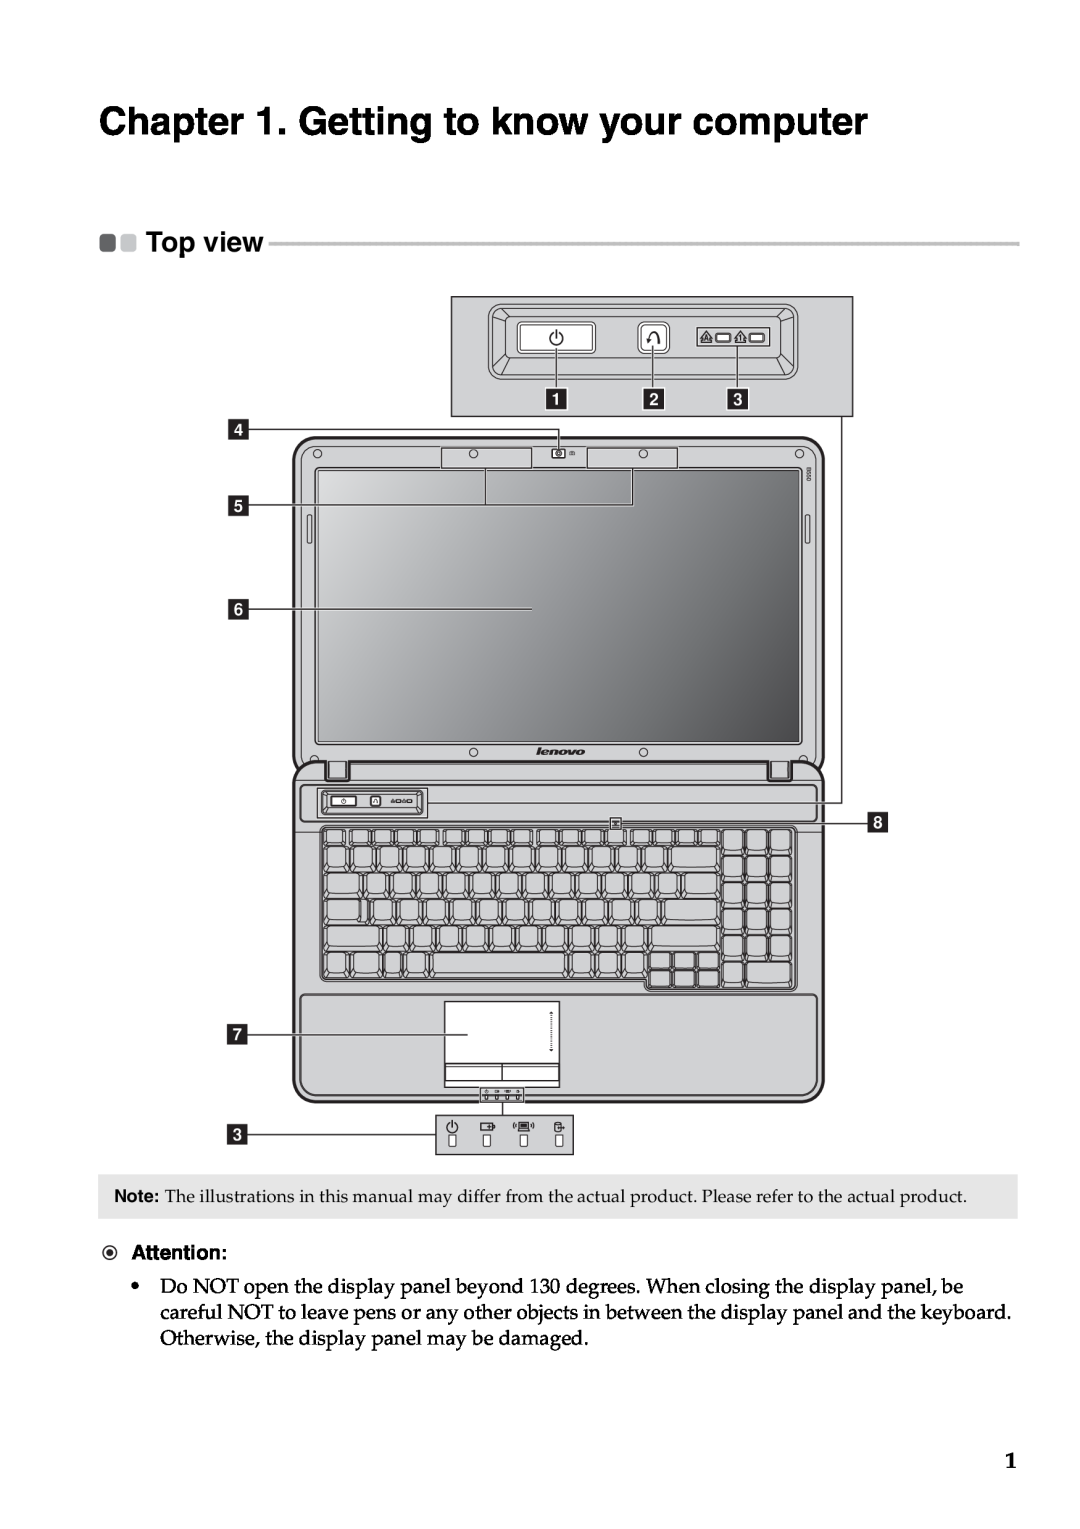 Lenovo B550, 57323748 manual Getting to know your computer, Top view 